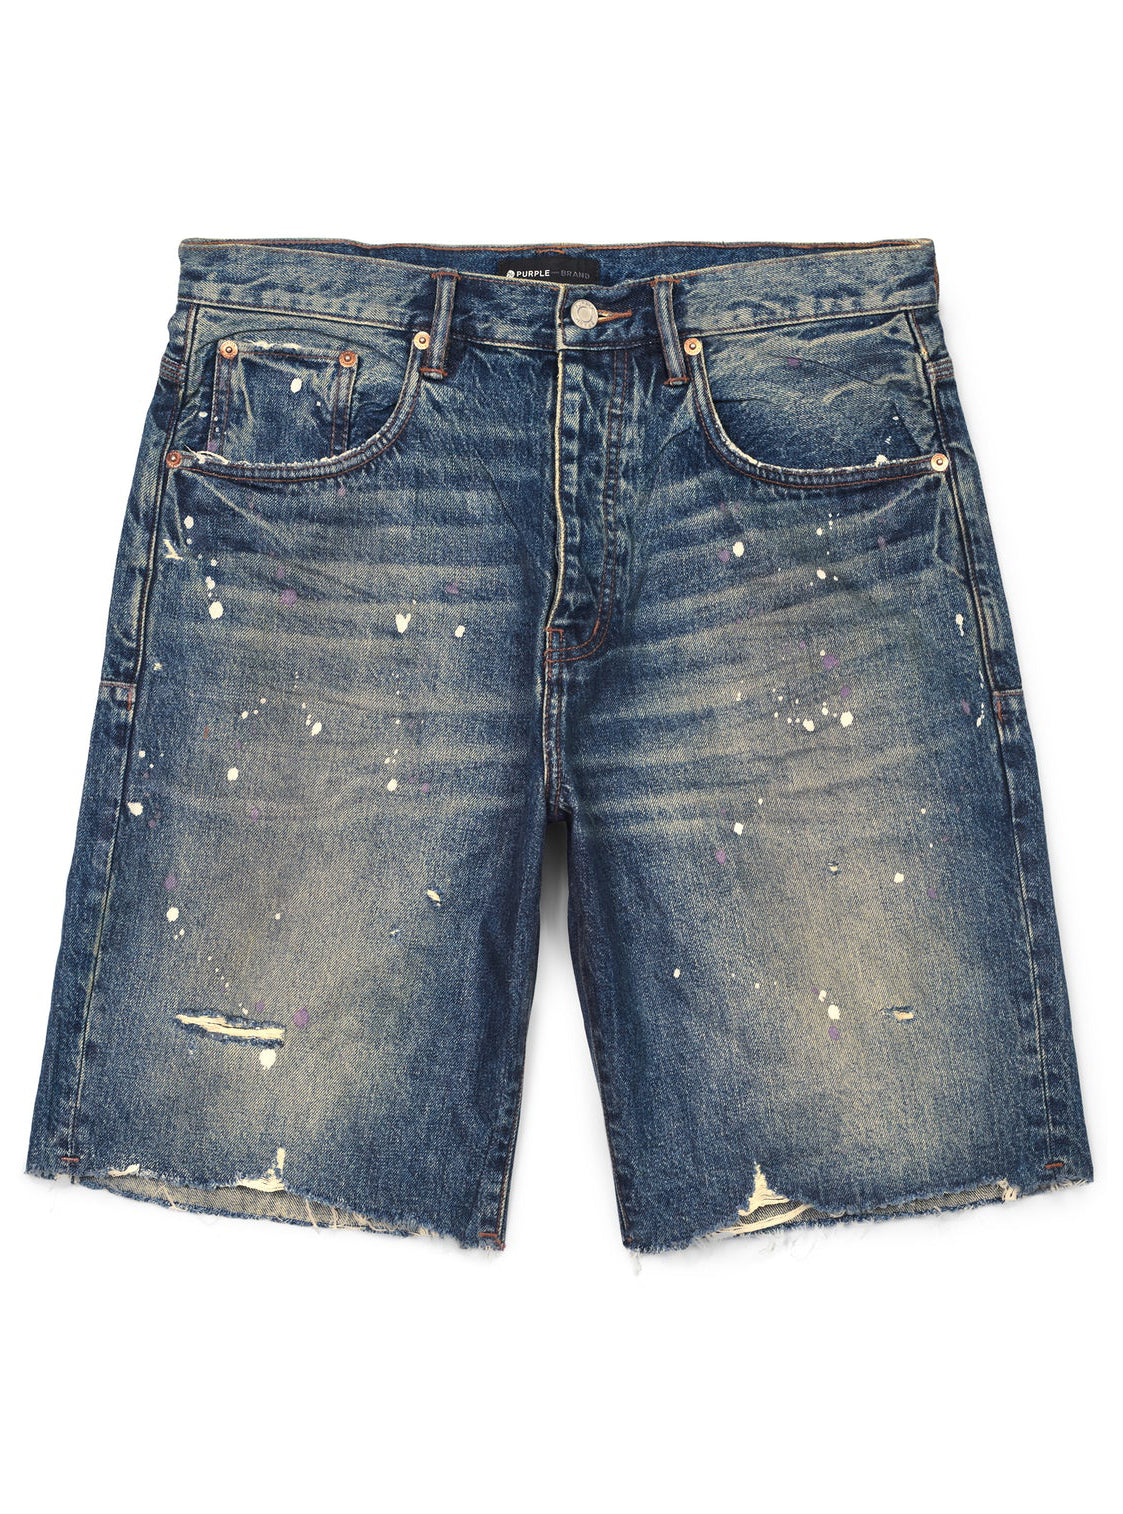 DIRTY TINTED VINTAGE SHORTS - BLUE